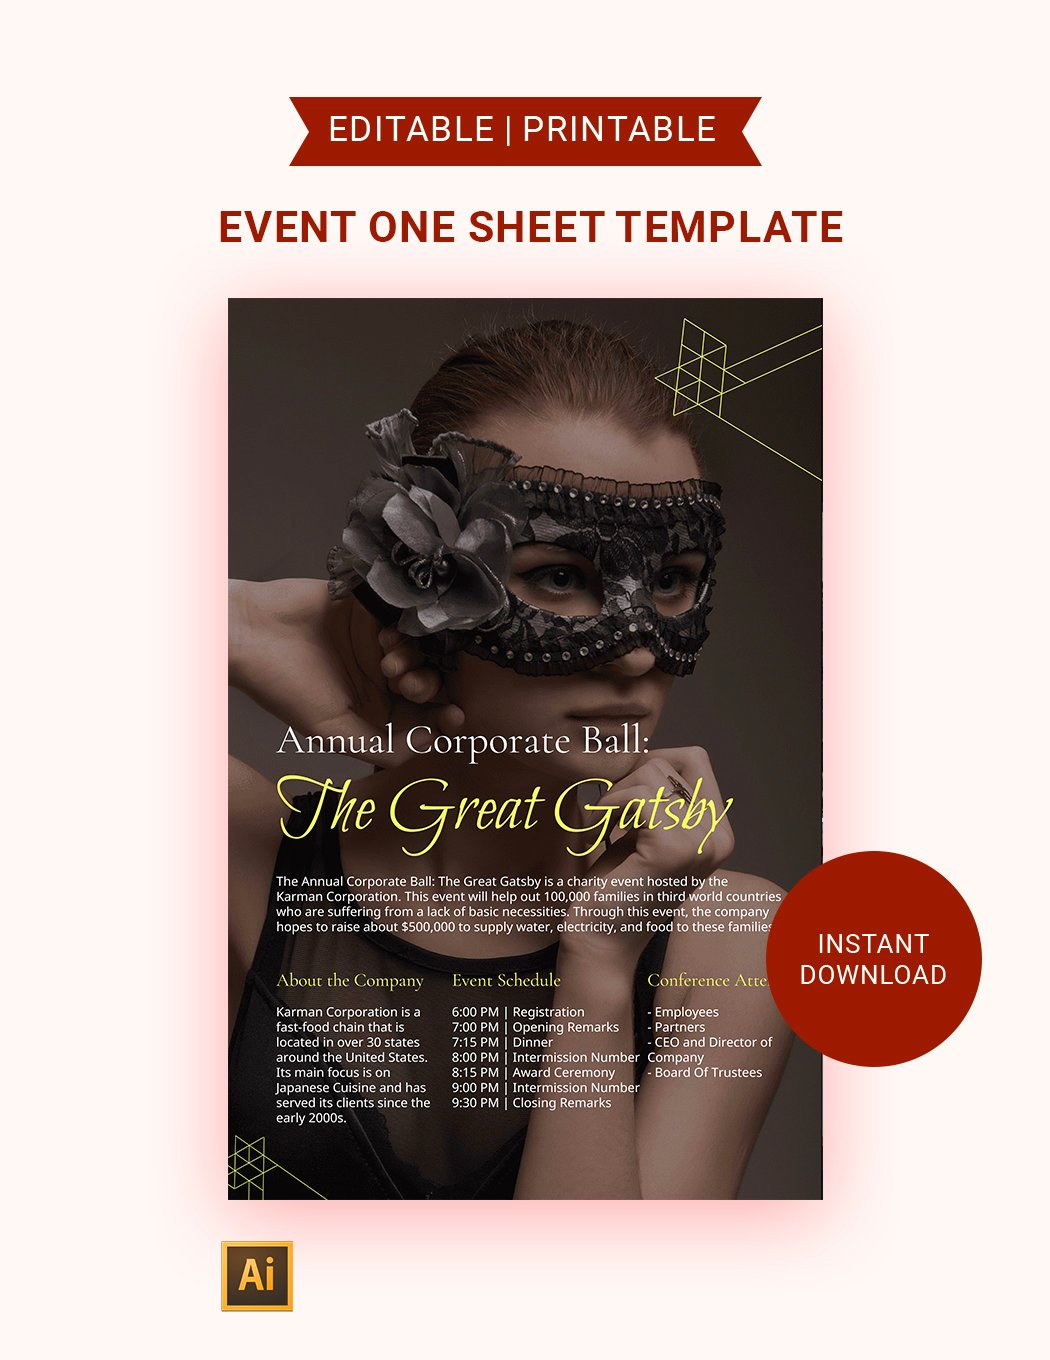 Event One Sheet Template